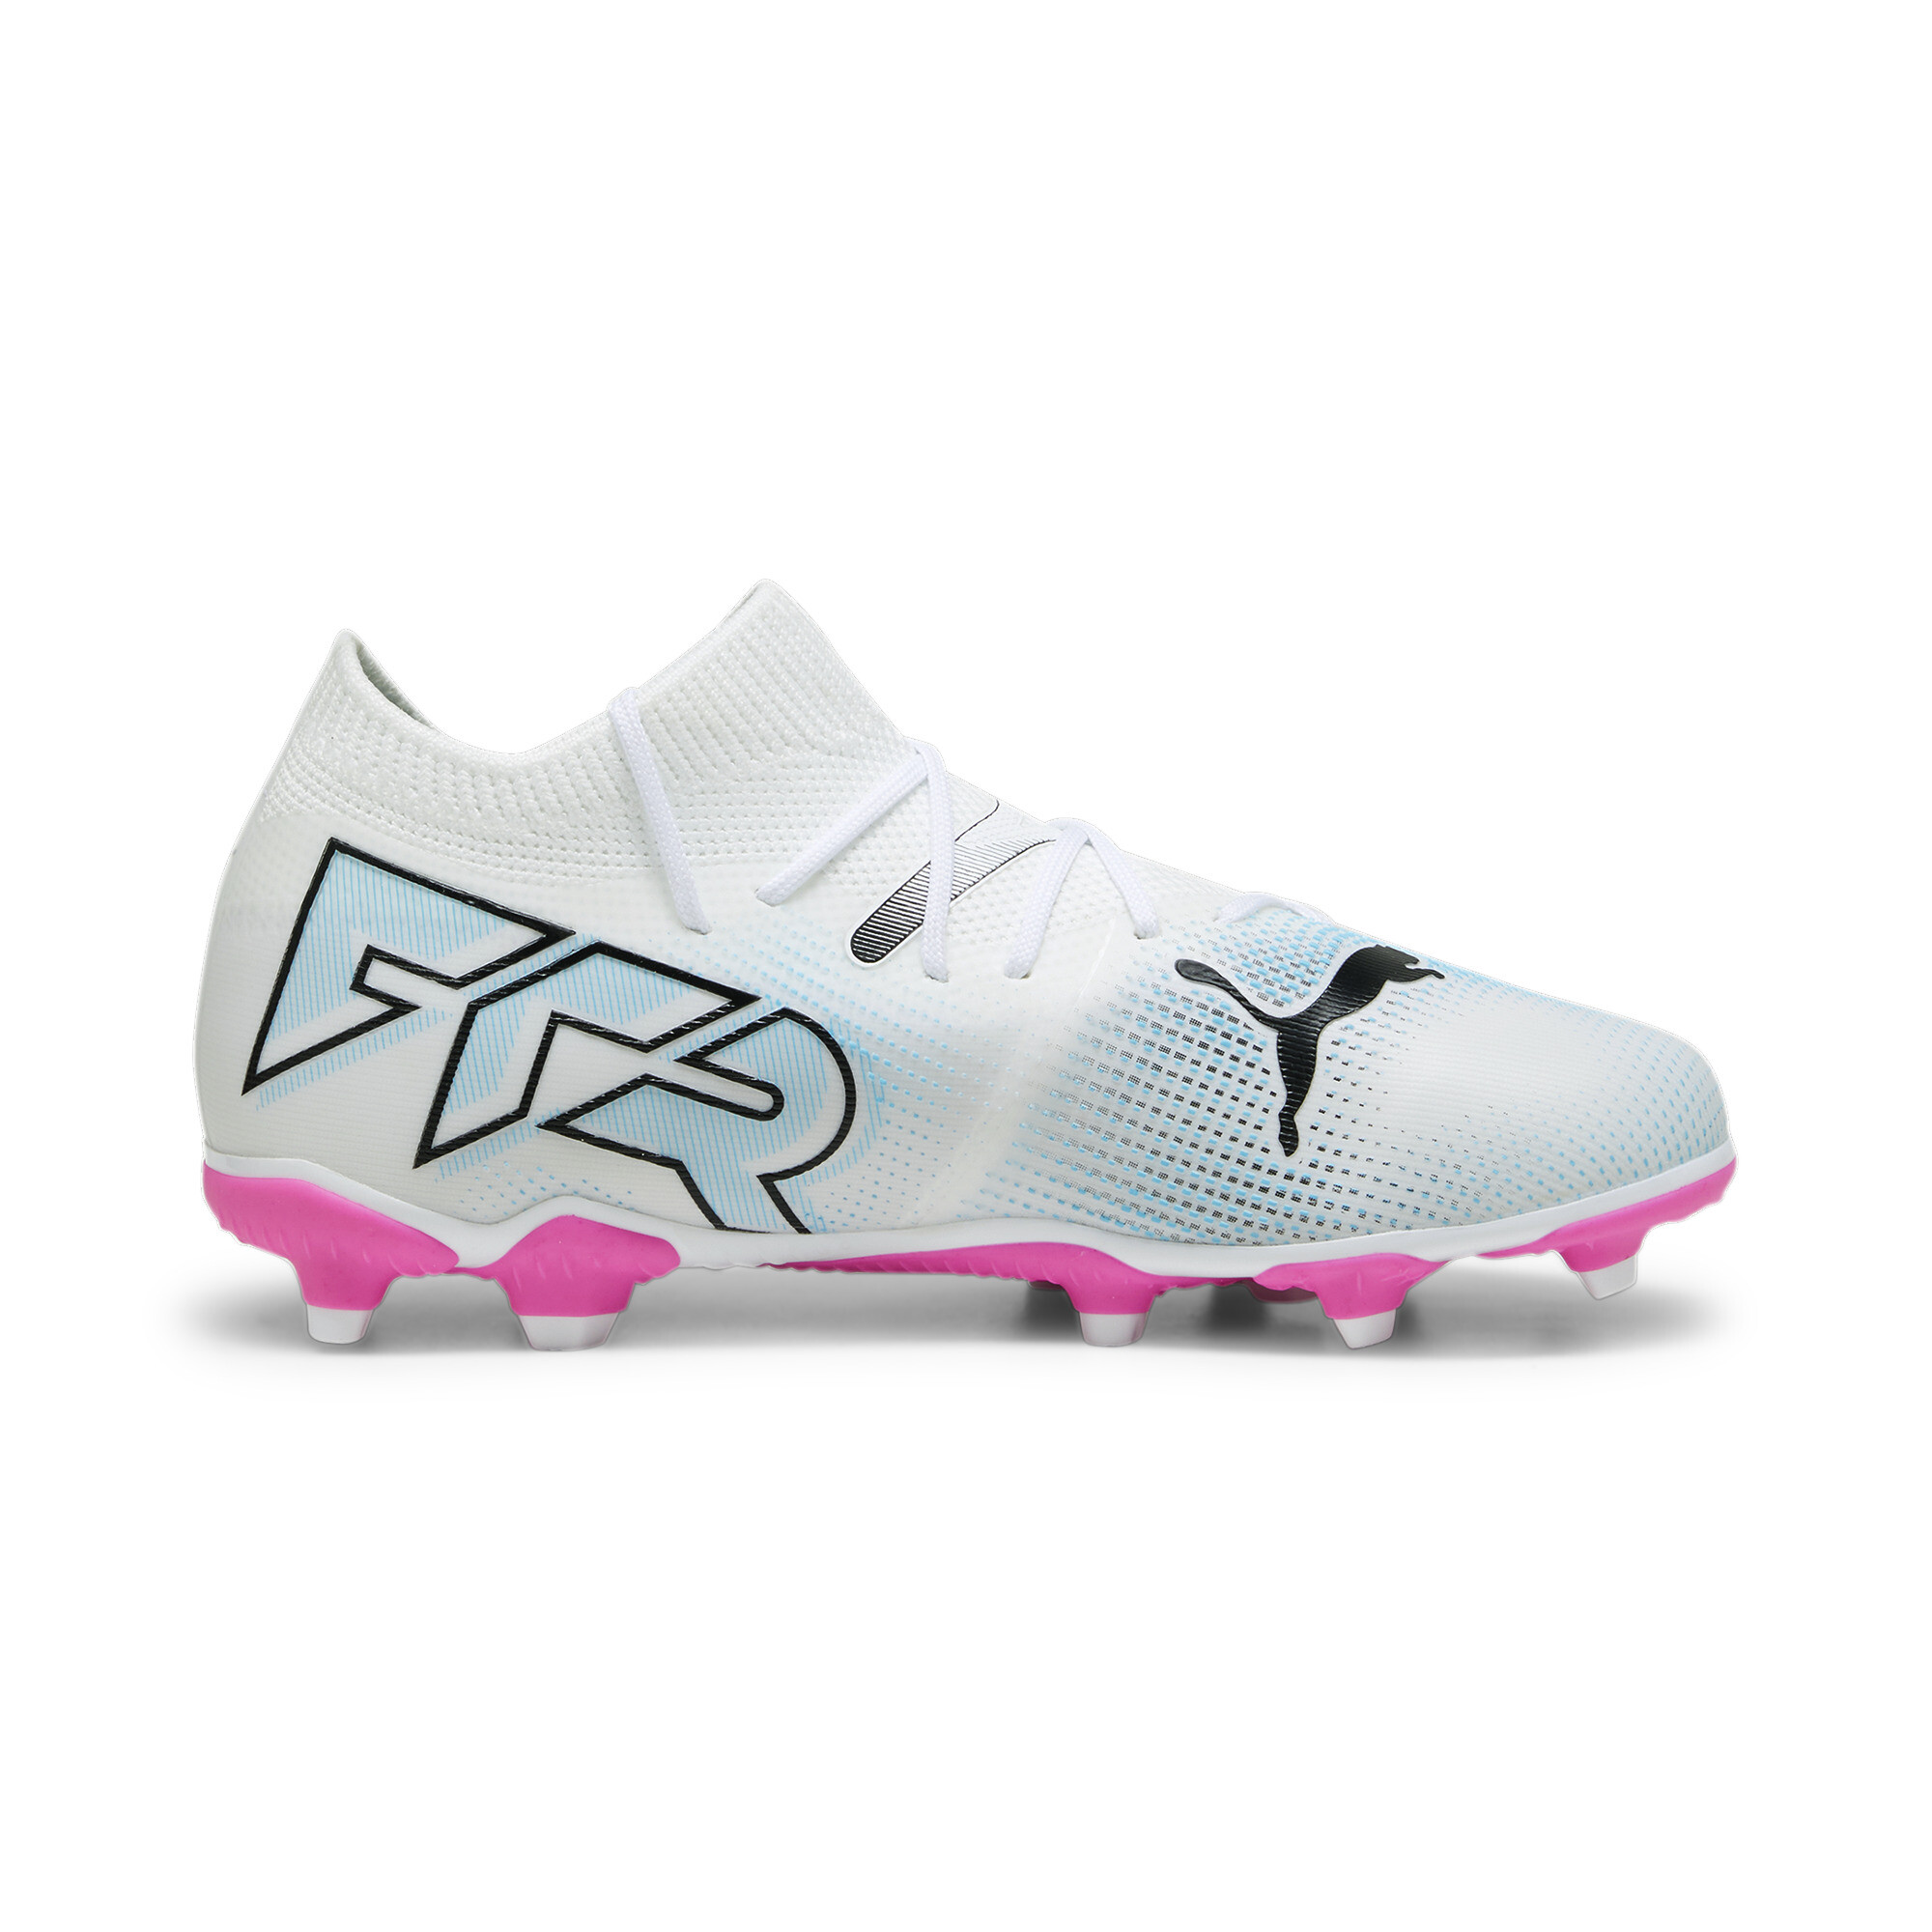 PUMA FUTURE 7 MATCH FG/AG Youth Football Boots In White/Pink, Size EU 37